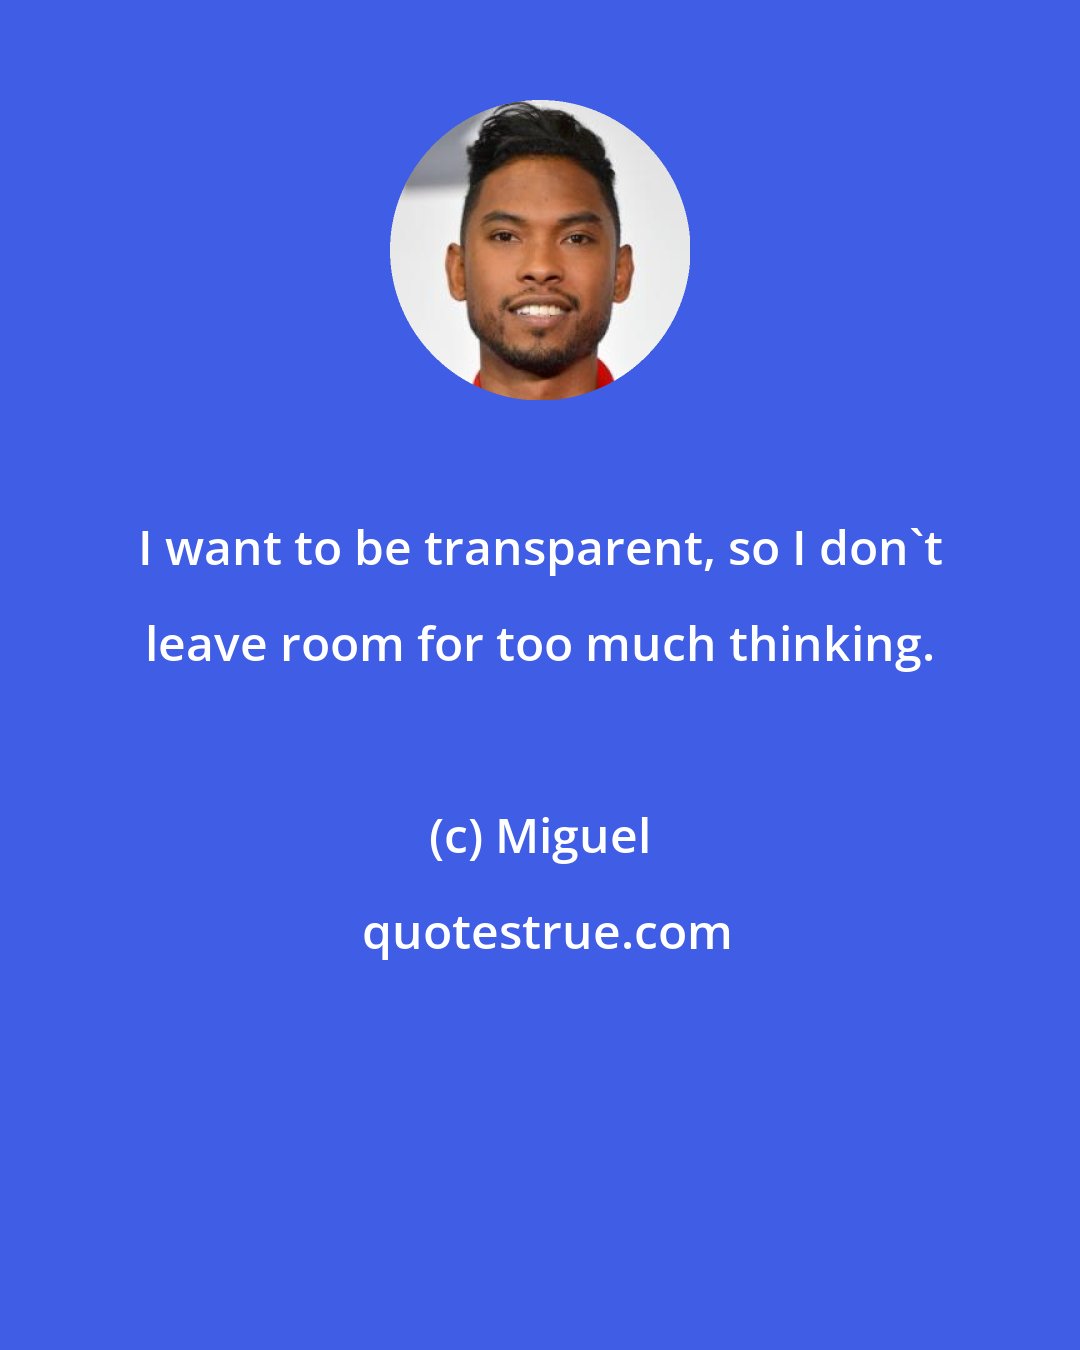 Miguel: I want to be transparent, so I don't leave room for too much thinking.